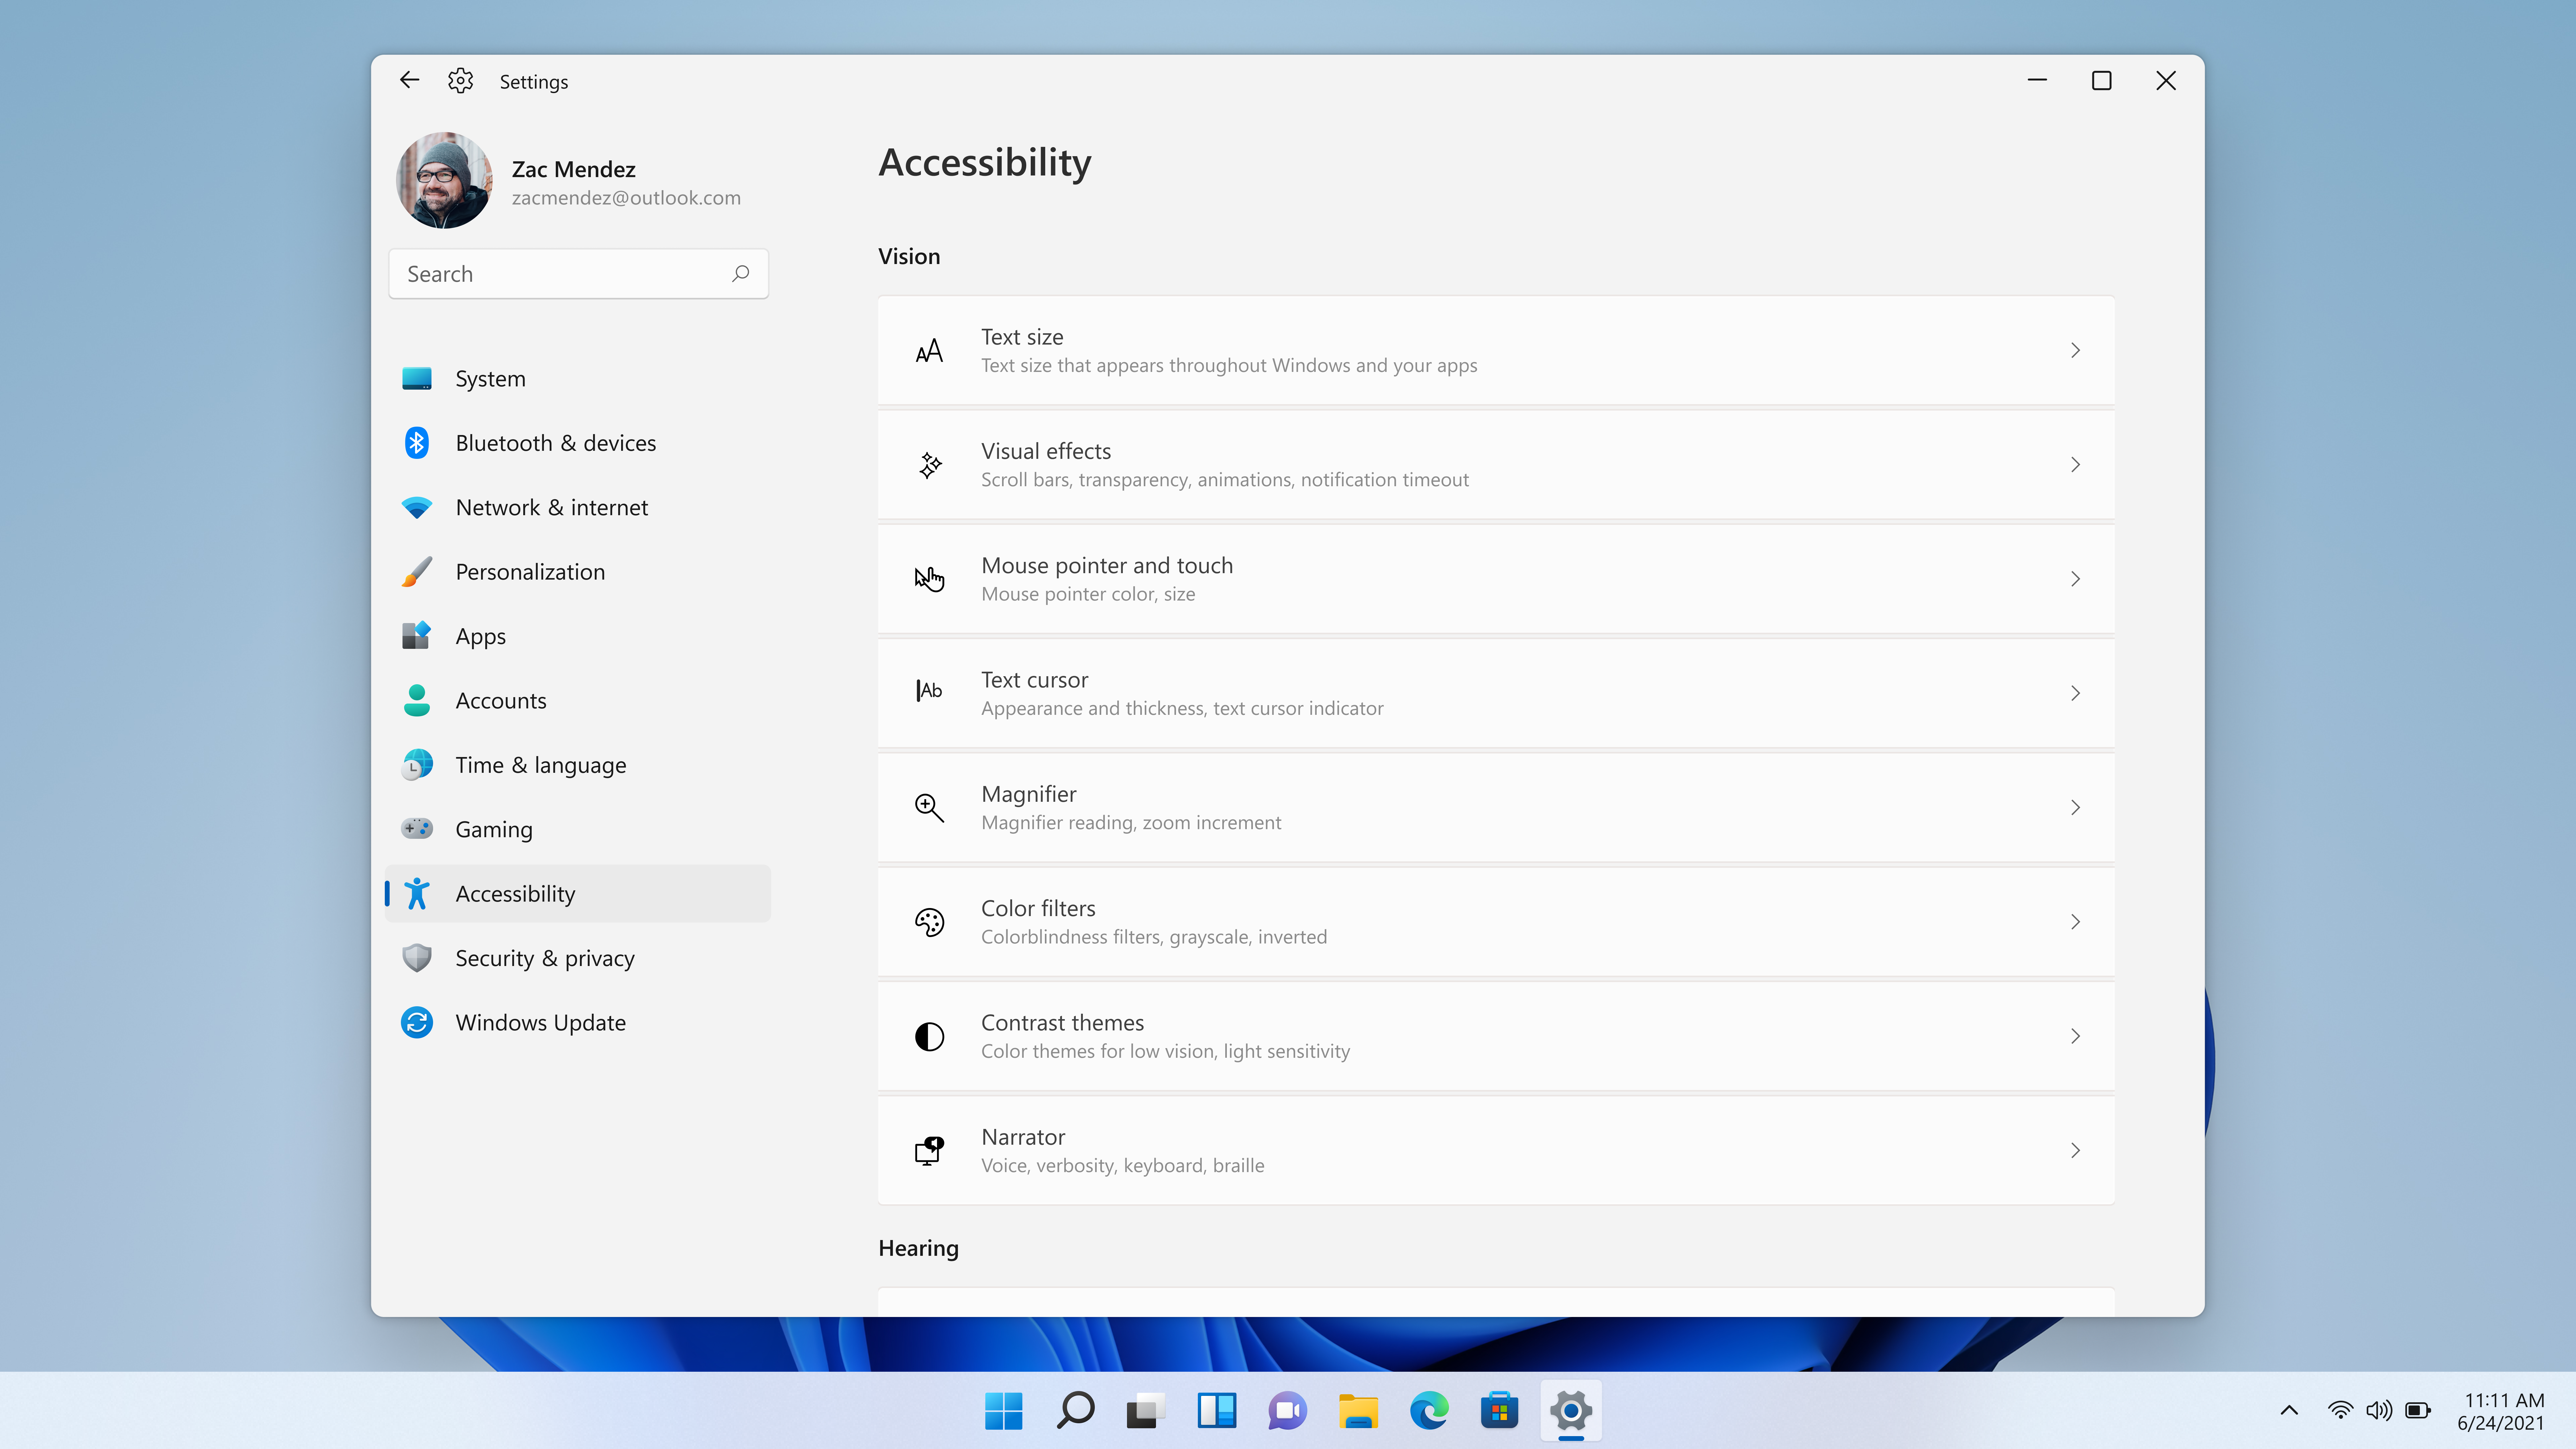 A screenshot of the new accessibility settings menu in Windows 11.